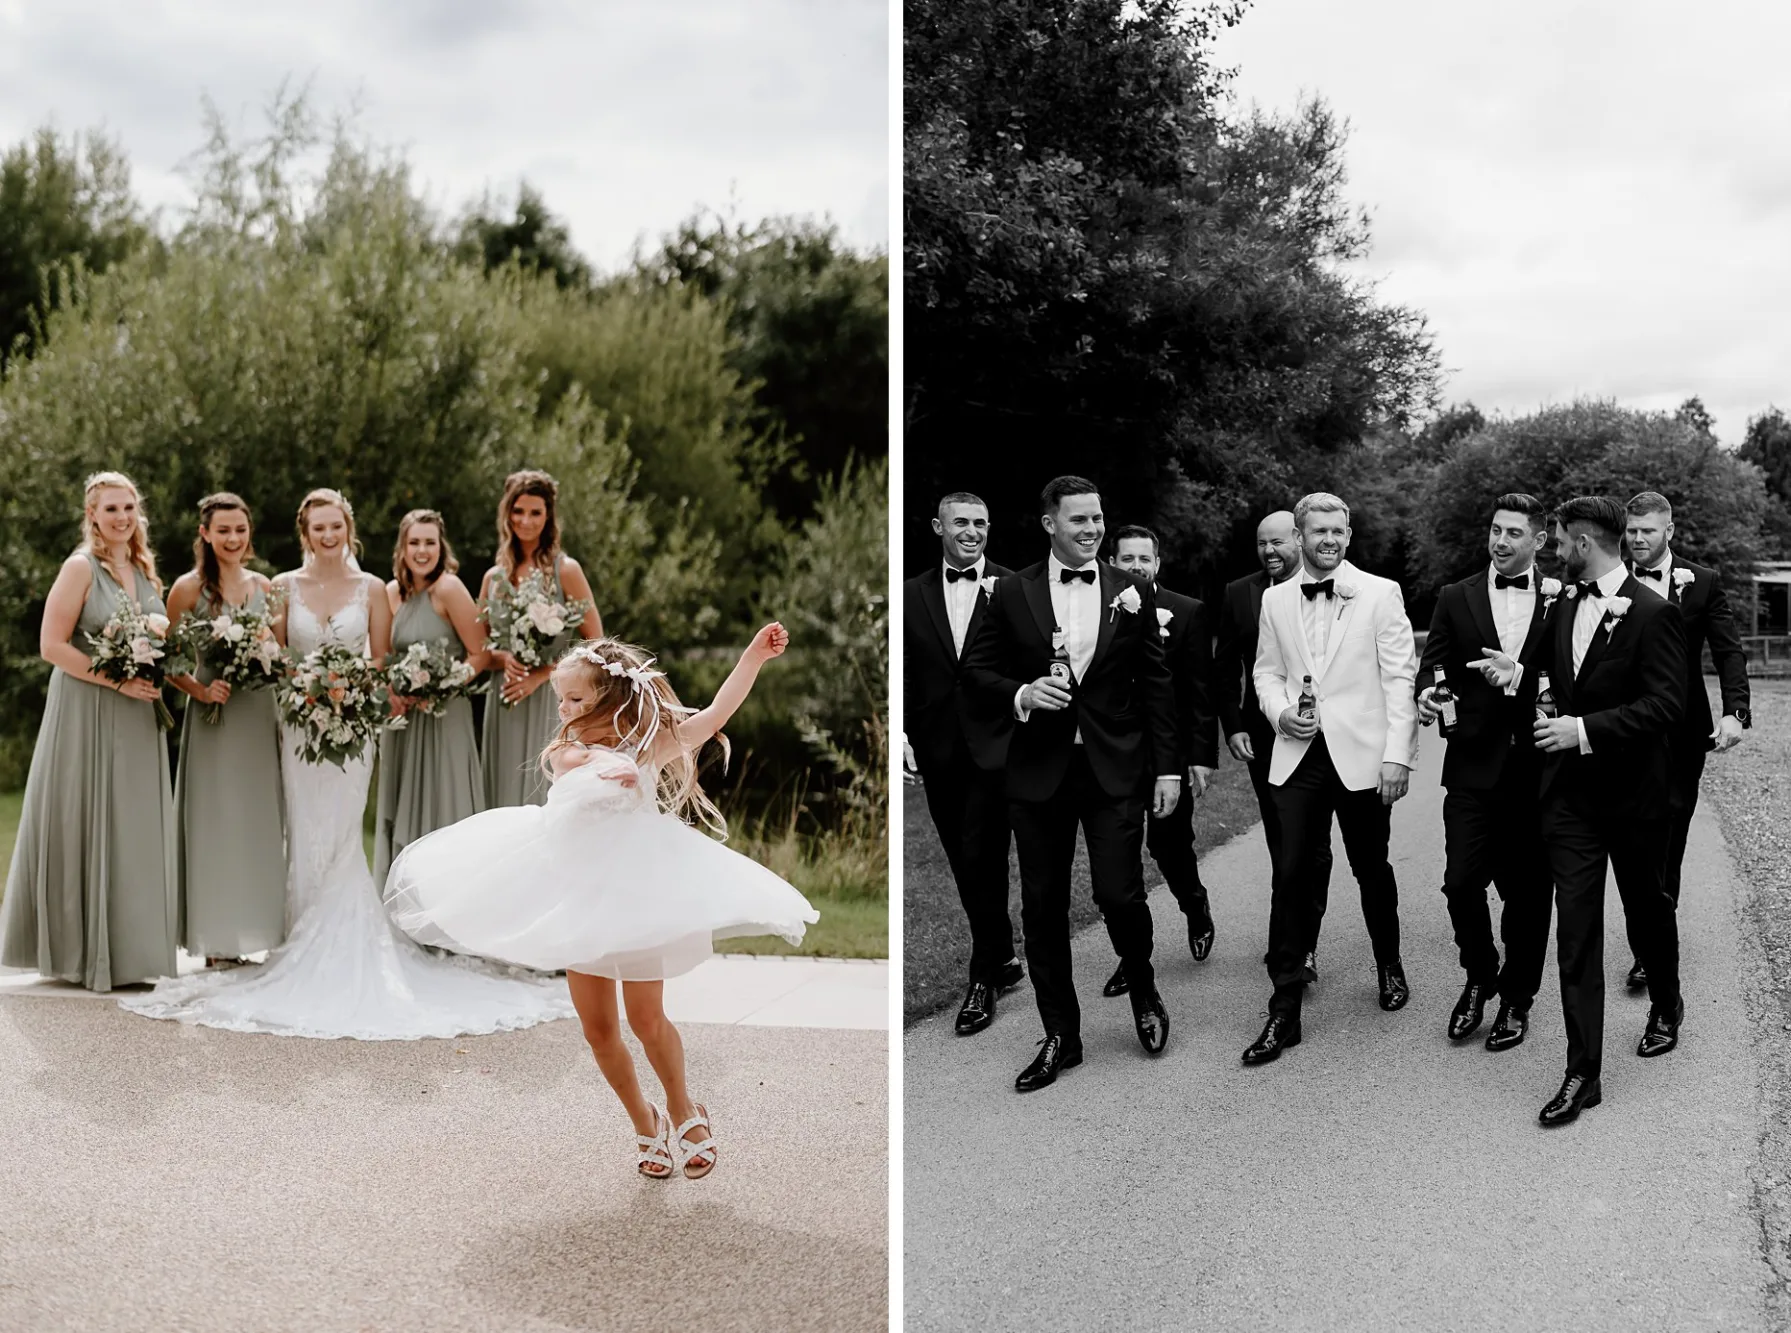 The first image shows a bride and four bridesmaids in the background smiling at a small flowergirl spinning around. The second image shows a groom wearing a white suit walking with his groomsmen. They are all holding beers and smiling at each other.